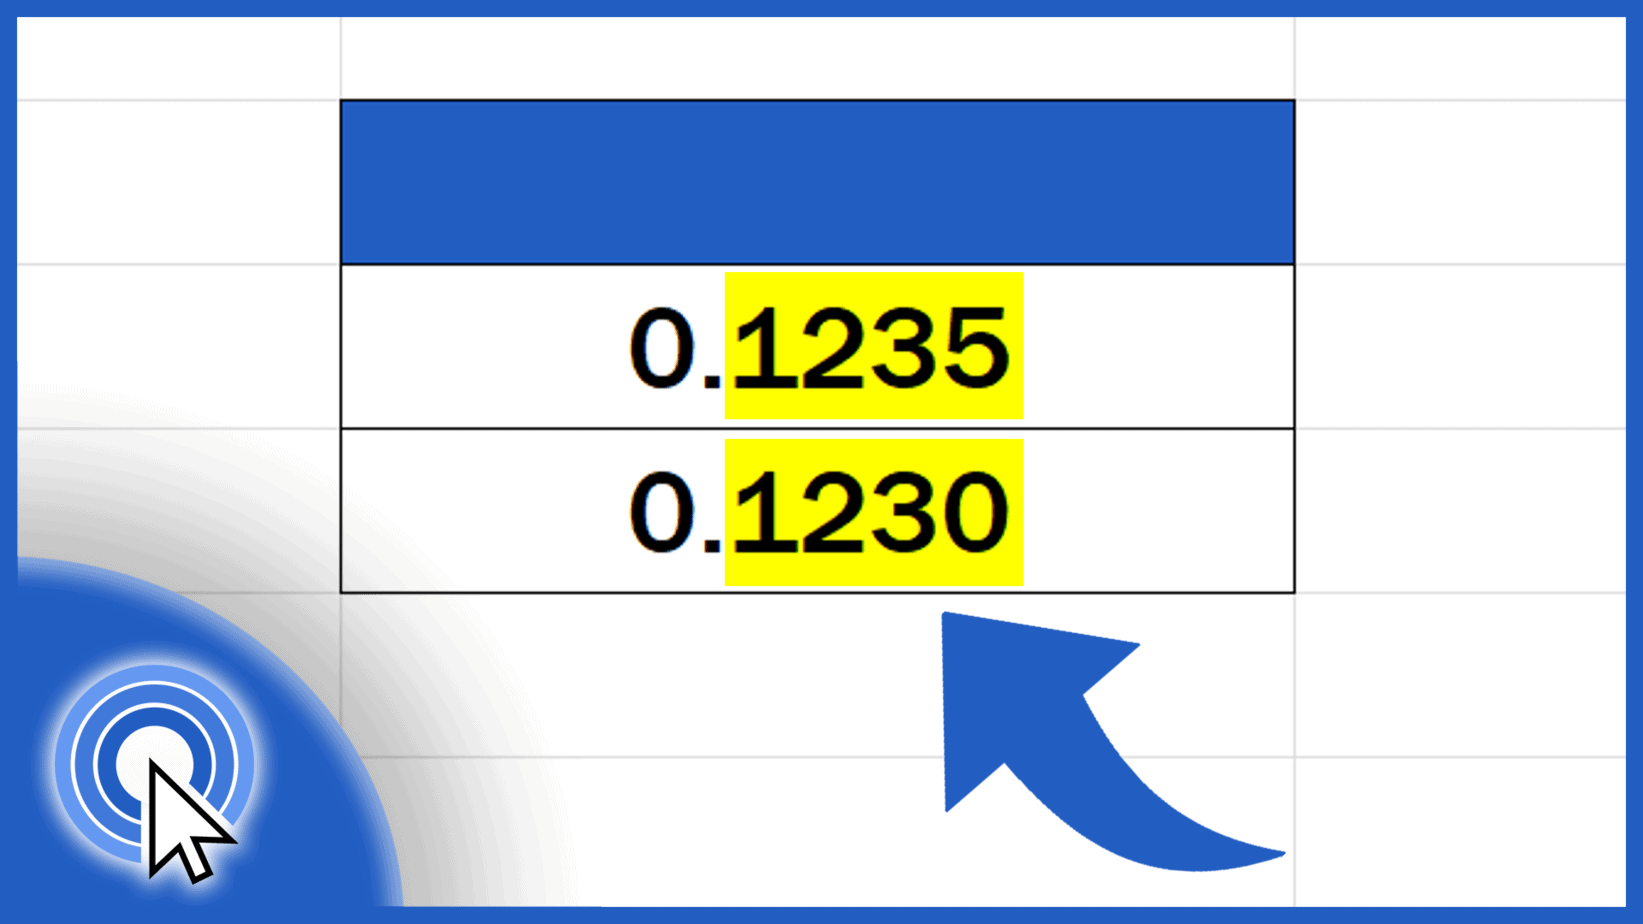 How to Change Decimal Places in Excel